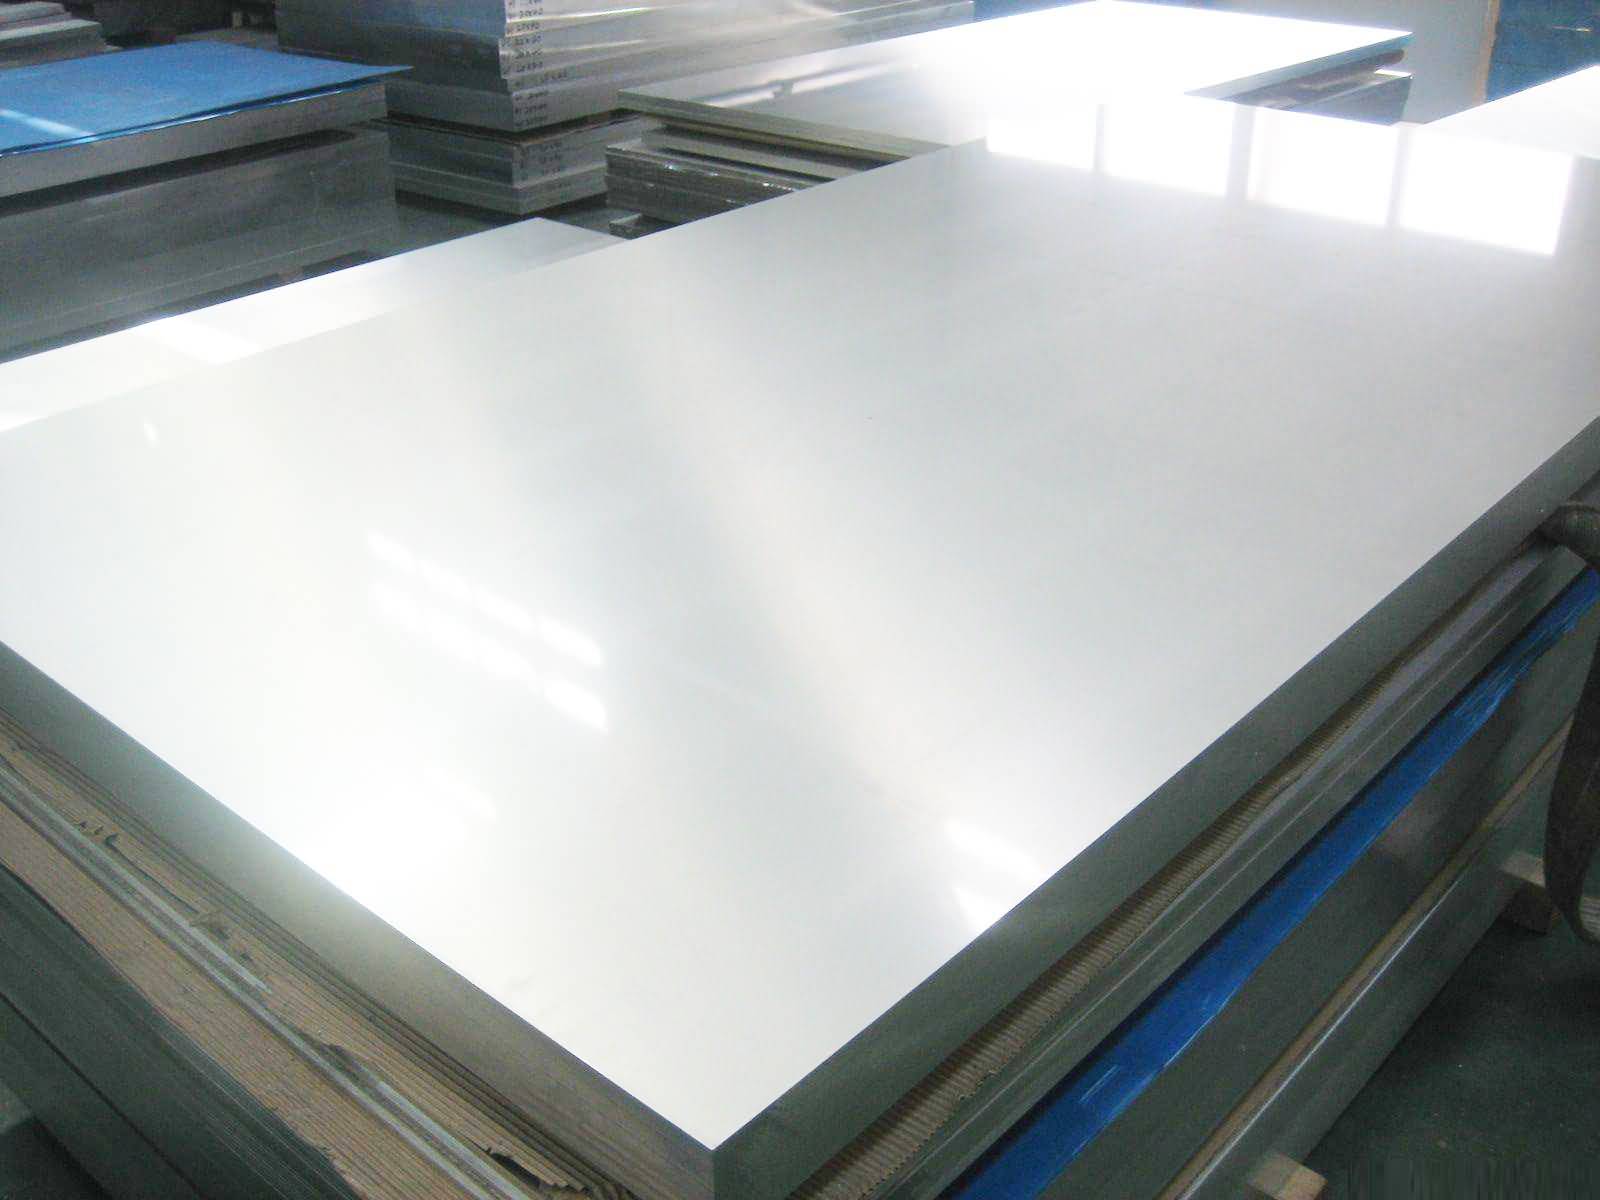 SUSXM7 stainless steel sheet SUS430LX stainless steel sheet SUS430 stainless steel sheet